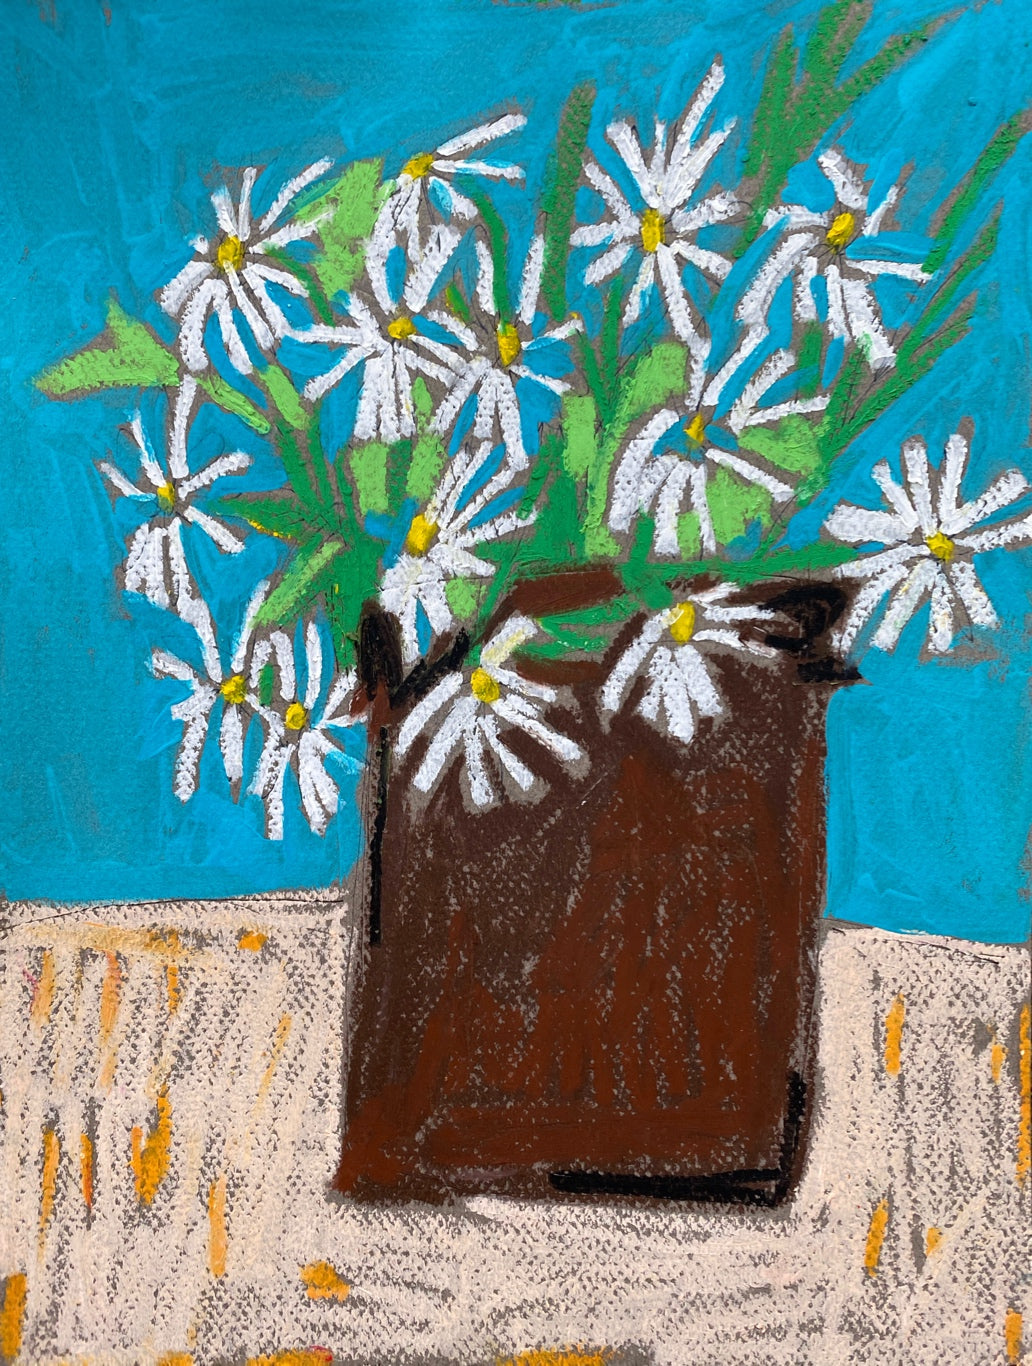 Shasta Daisy in a Clay Pot / 9”x12” / oil pastel and acrylic on paper / teal brown peach